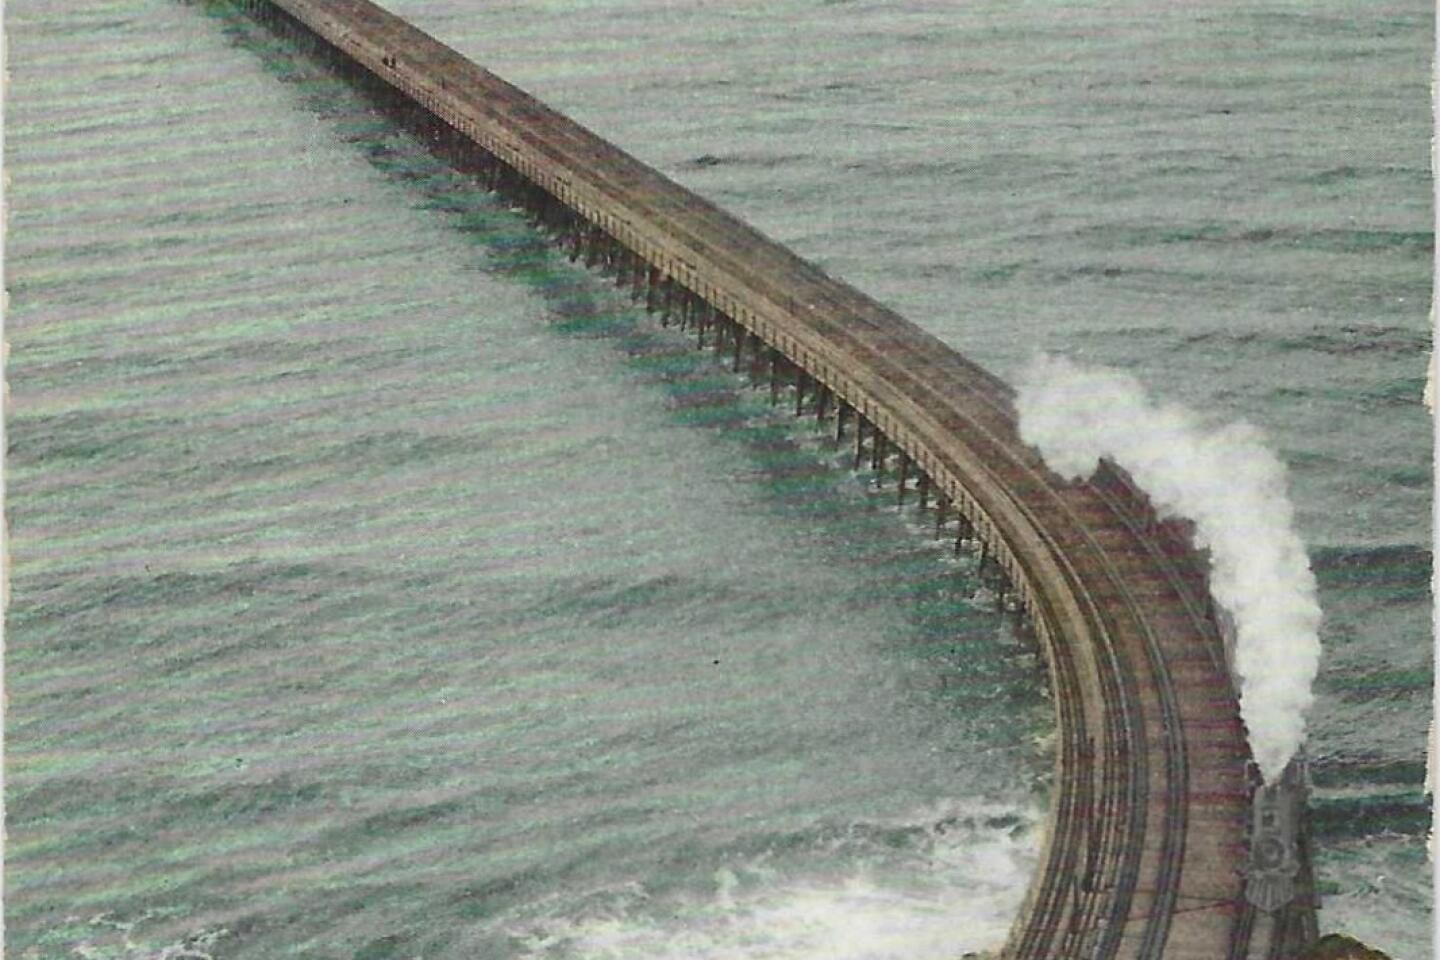 A train navigates the Long Wharf, which snakes out to sea off Santa Monica